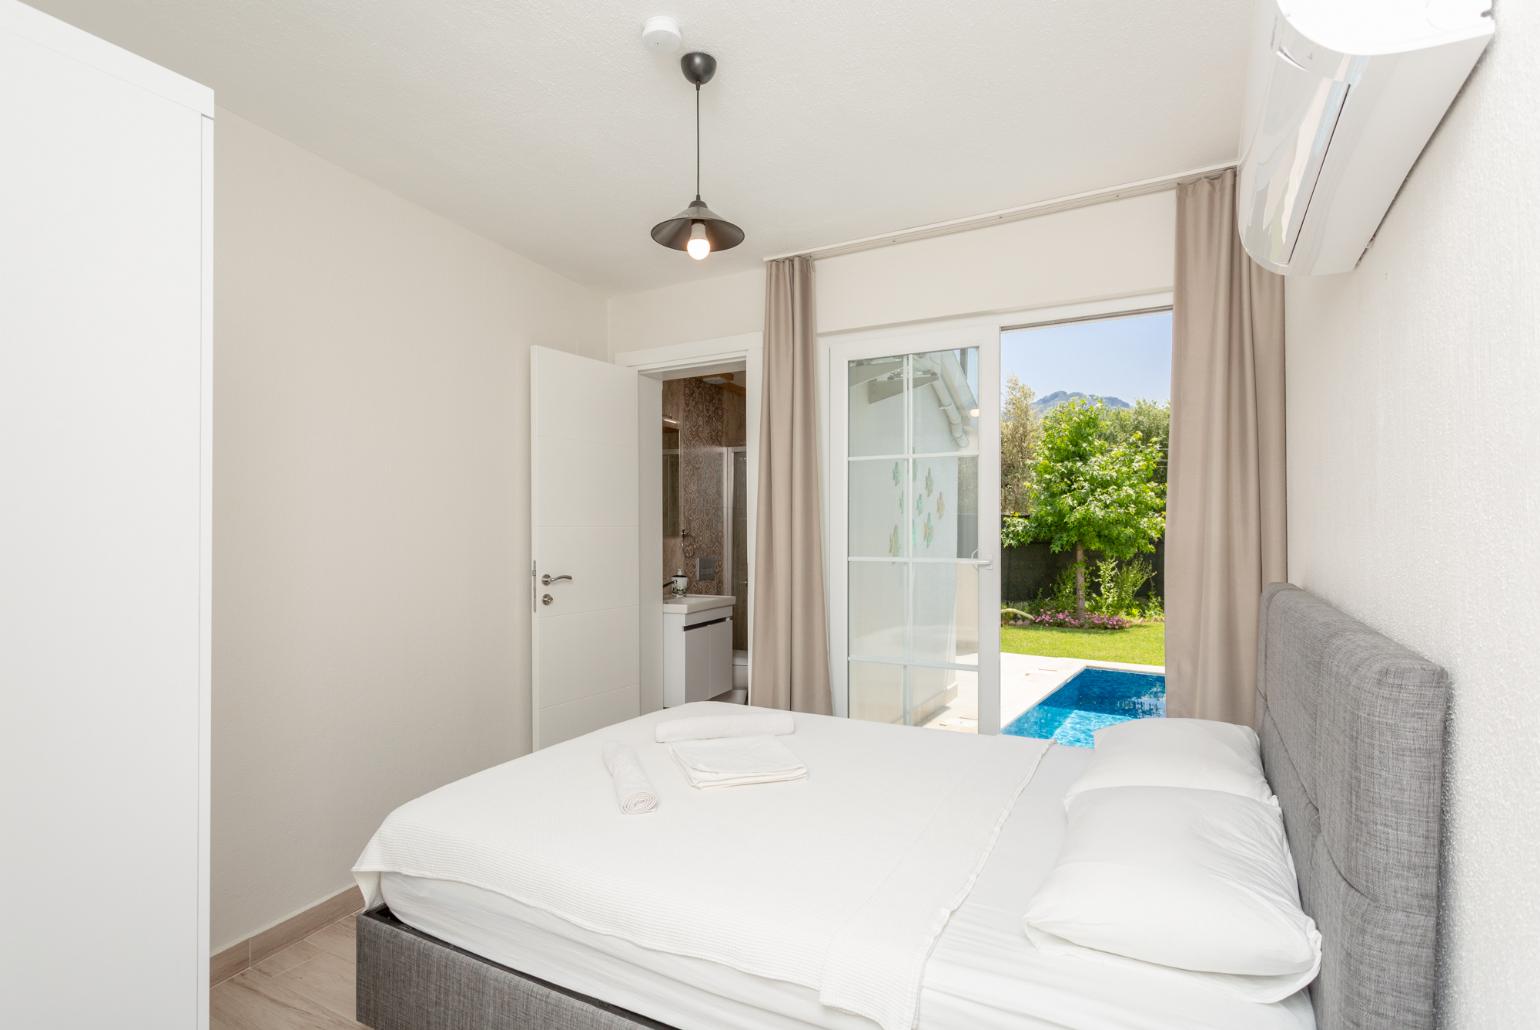 Double bedroom with en suite bathroom, A/C, and pool terrace access